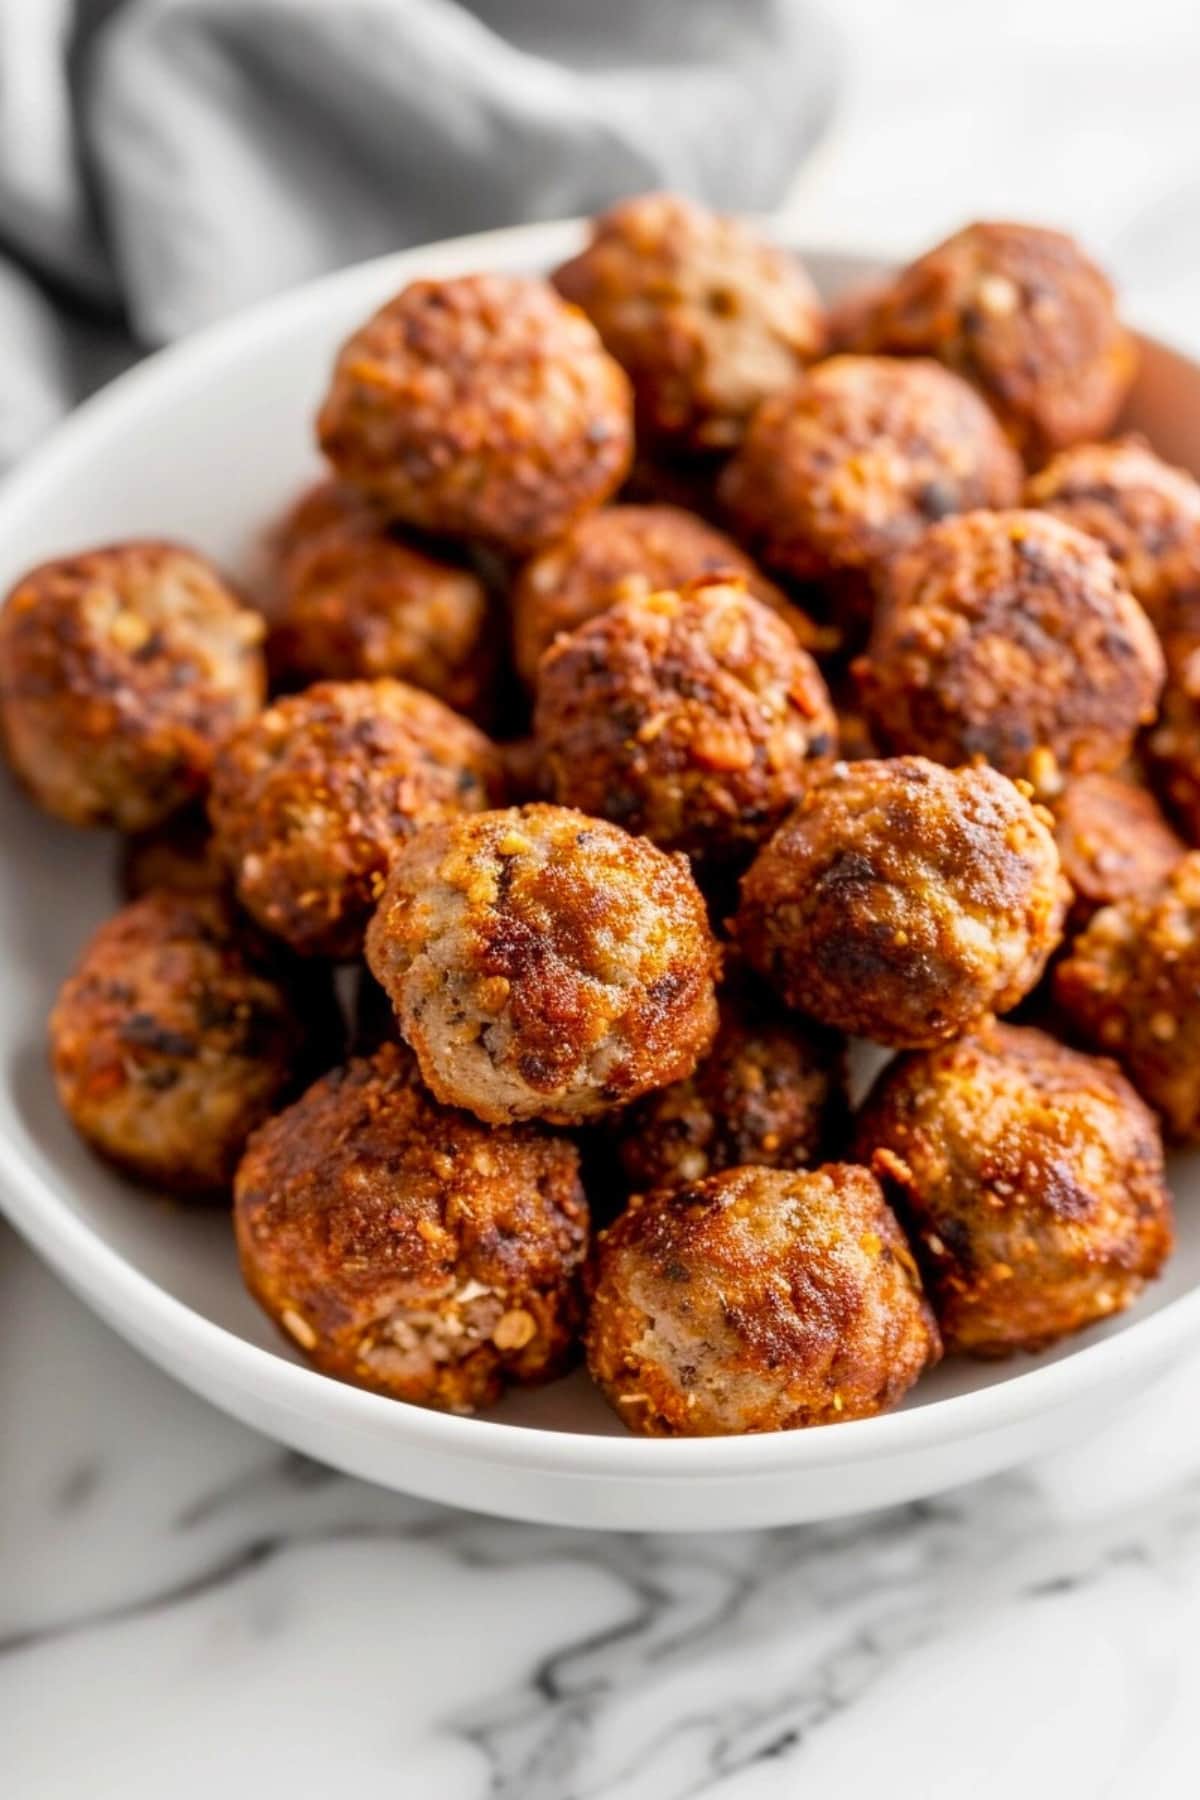 Bunch of meatballs in a white bowl.